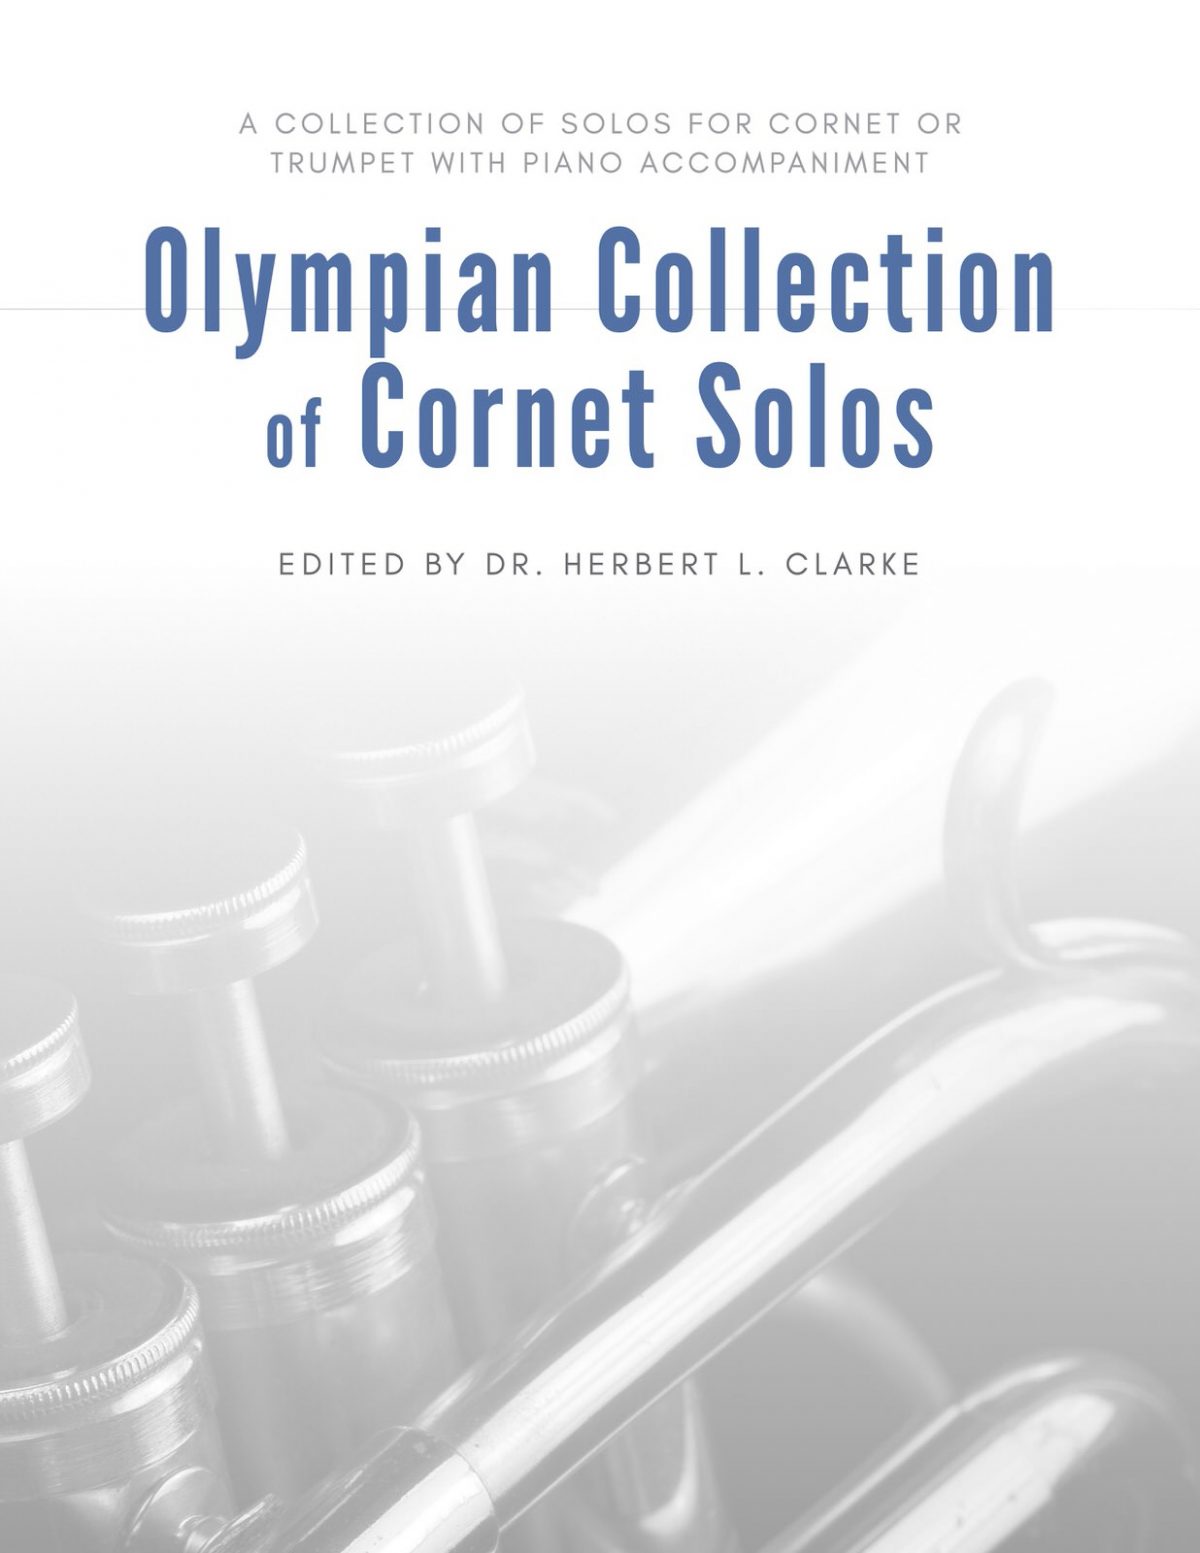 Olympian Collection of Cornet Solos